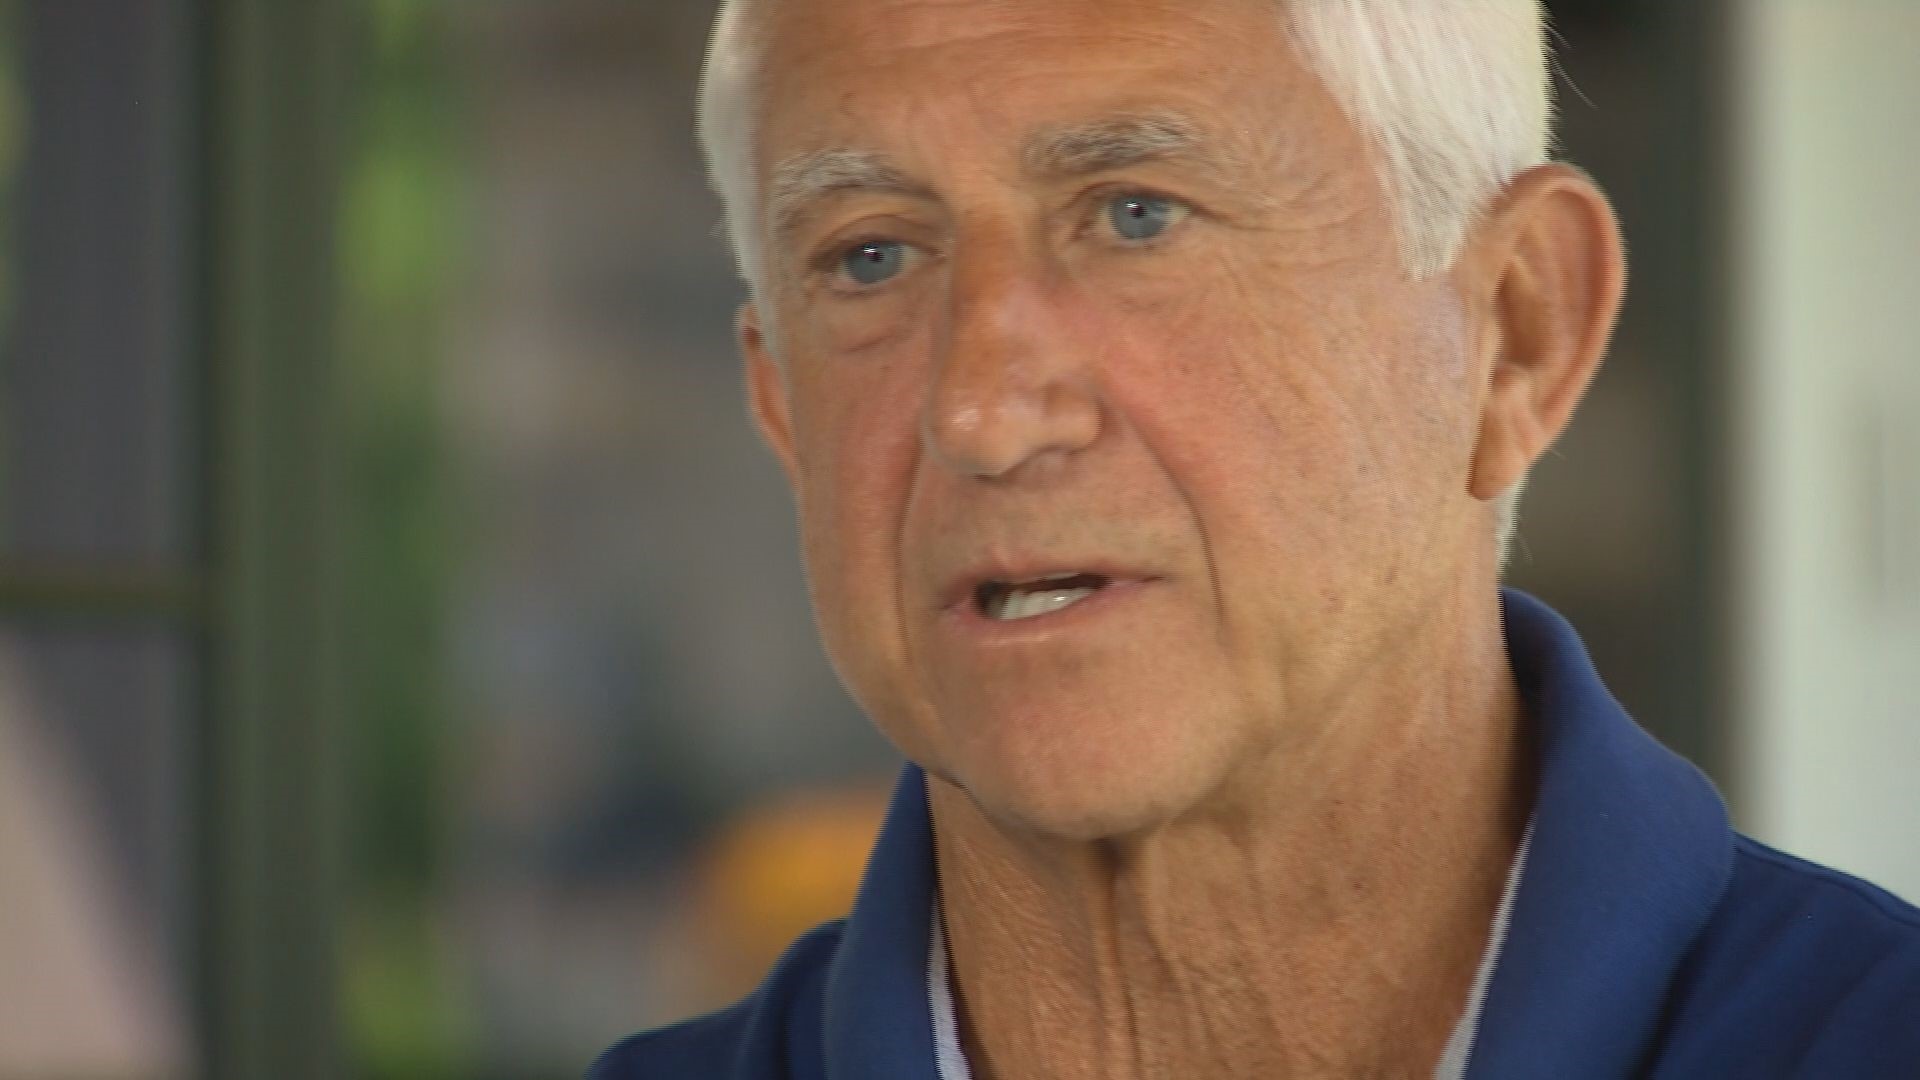 In his first interview since filing for the office June 30, Reichert said after leaving Congress in 2019, he has been frustrated with what he's seen.